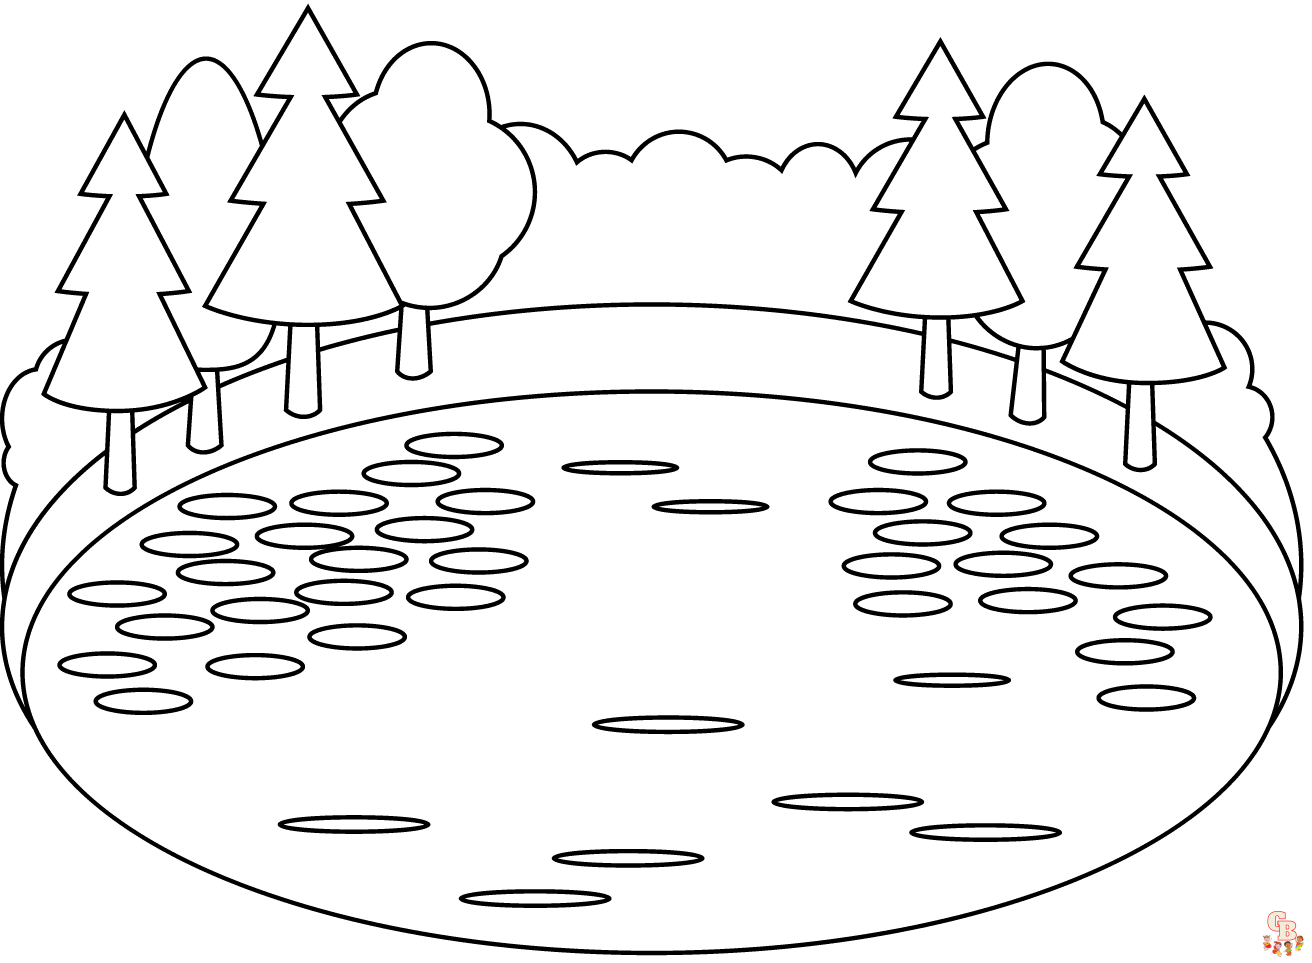 Printable lake coloring pages free for kids and adults